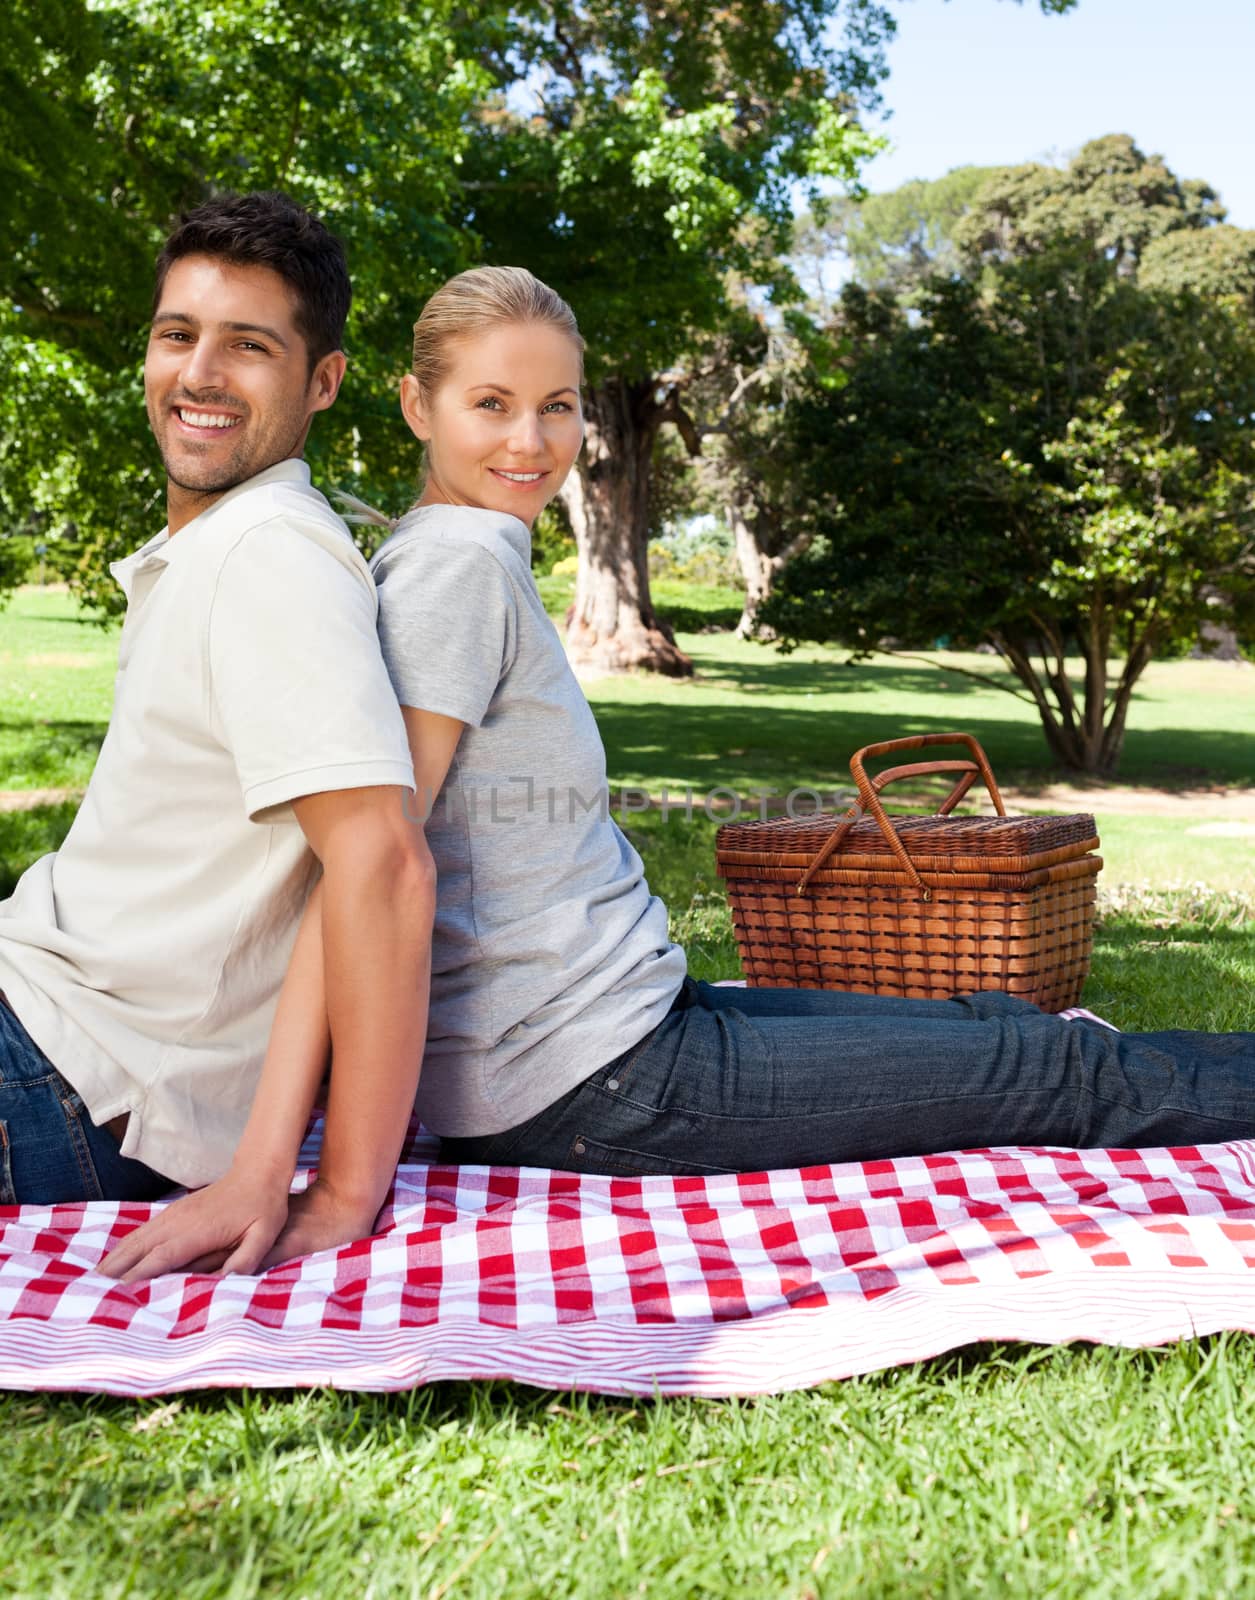 Lovers picnicking in the park by Wavebreakmedia